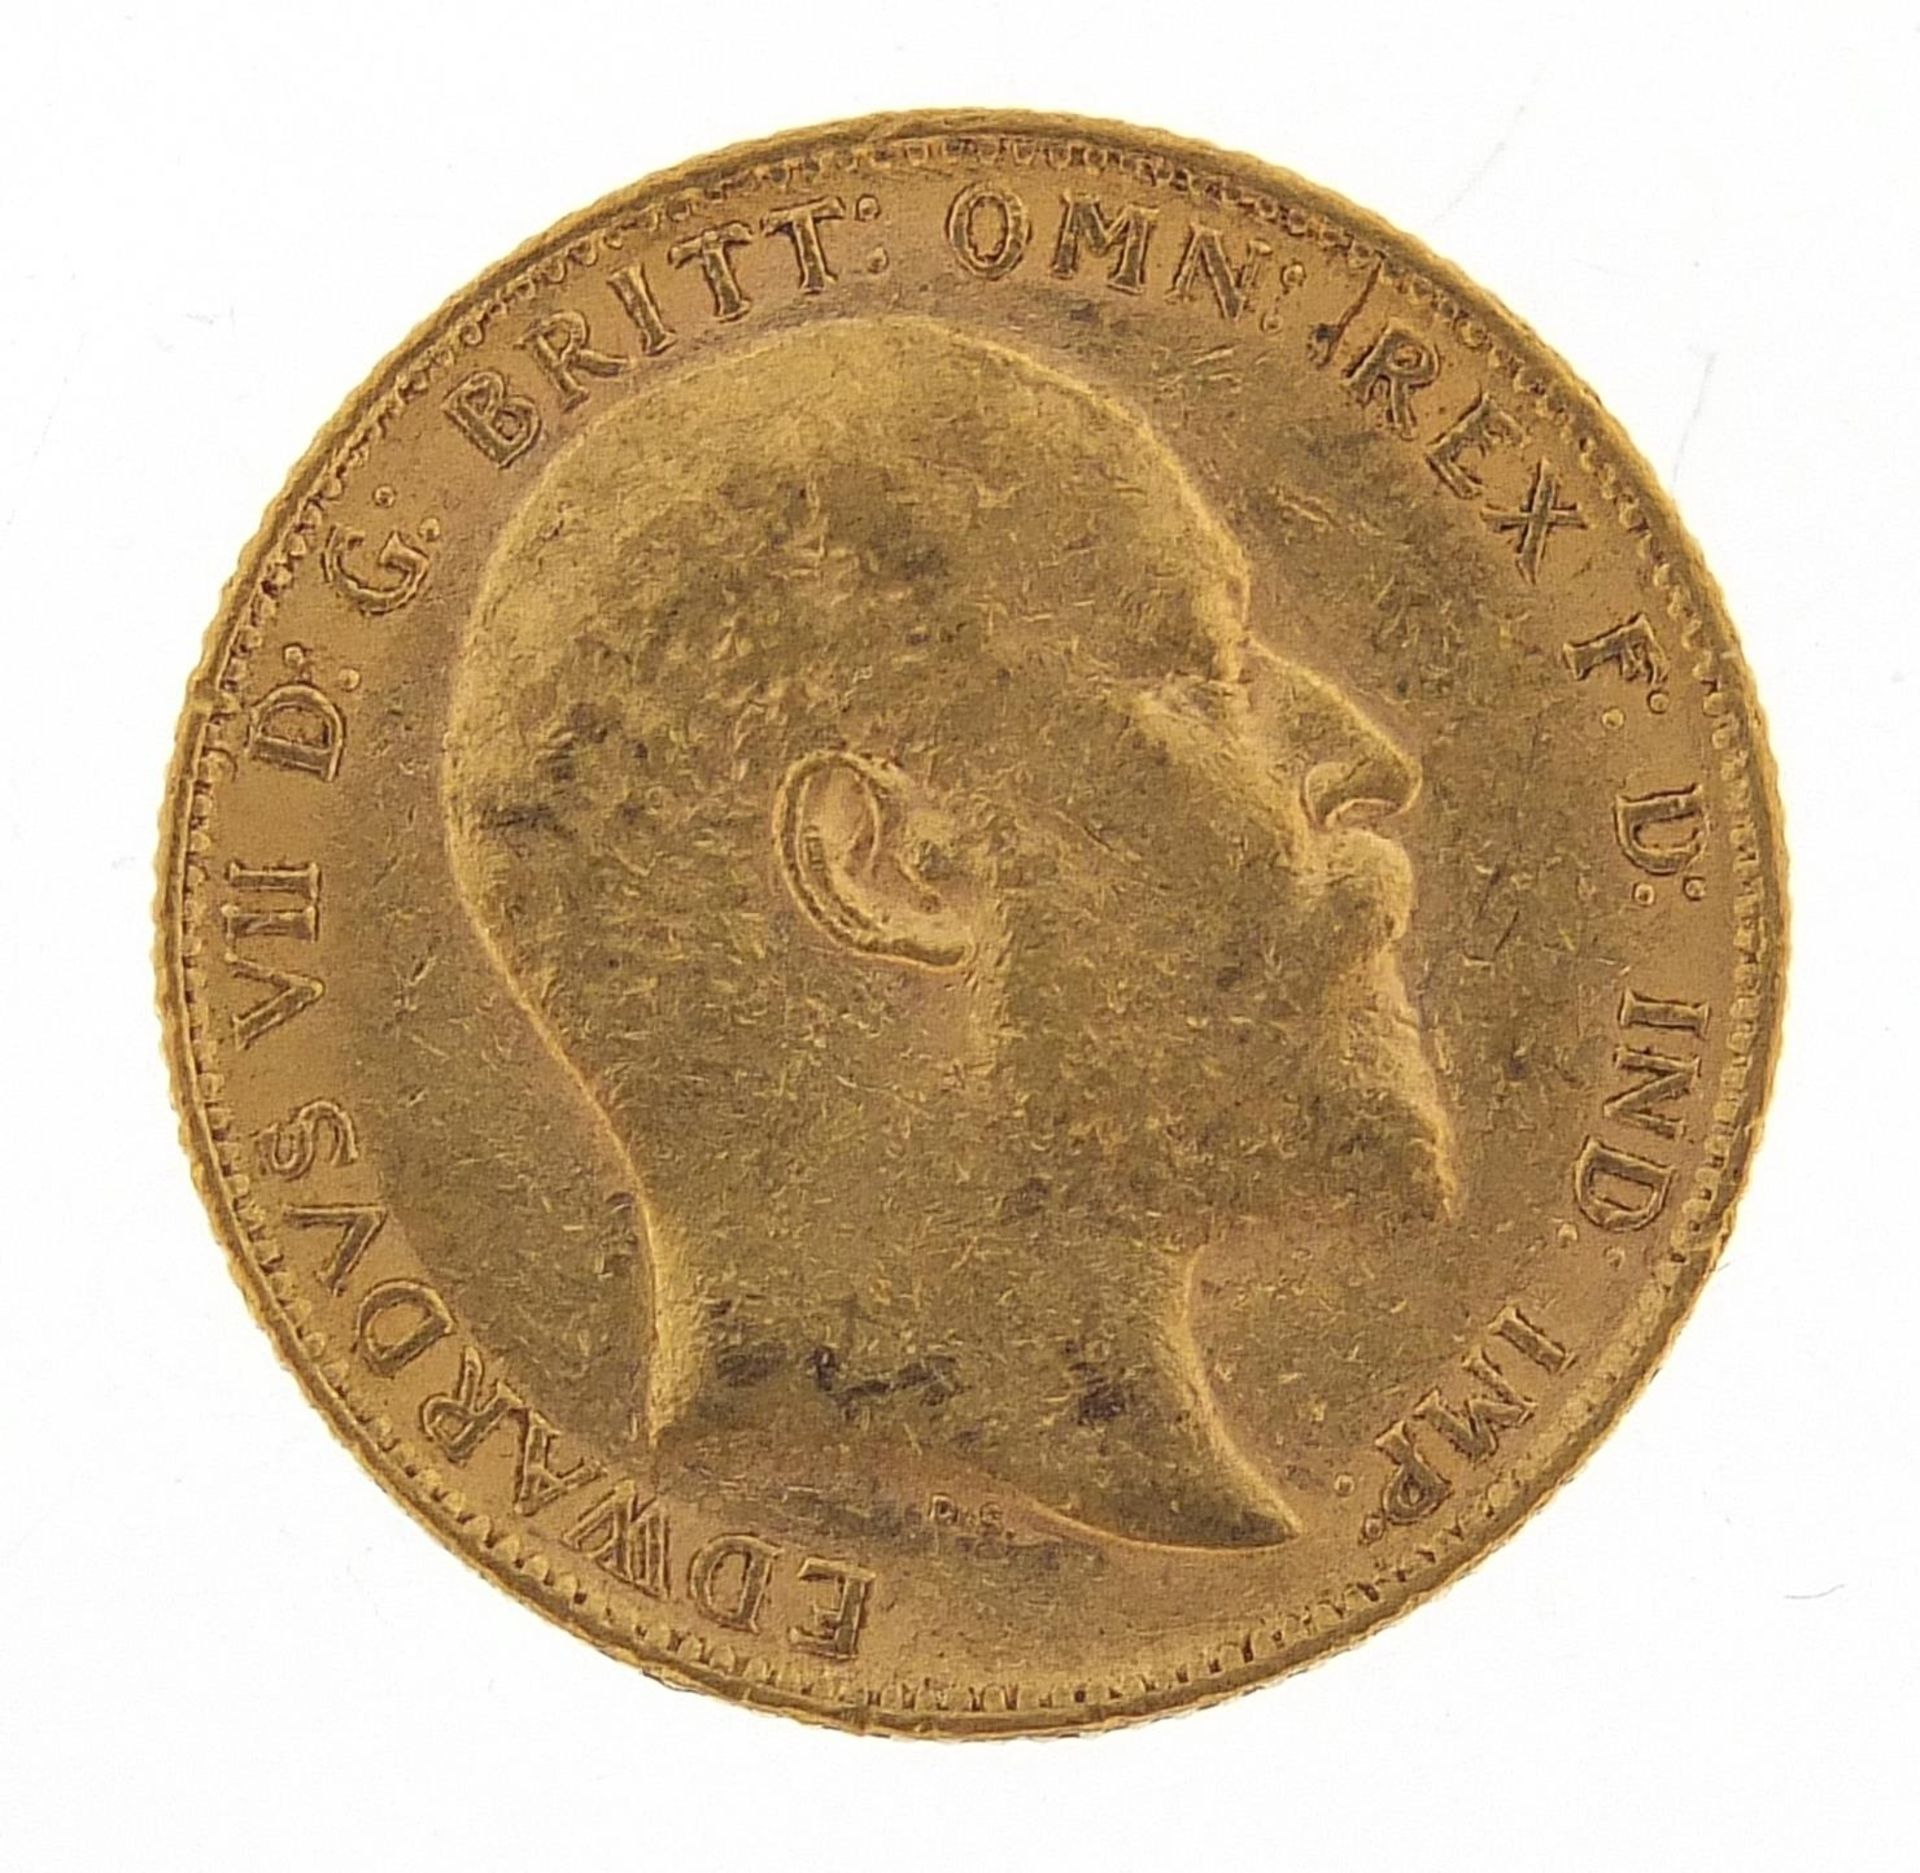 Edward VII 1902 gold sovereign - this lot is sold without buyer's premium - Image 2 of 3